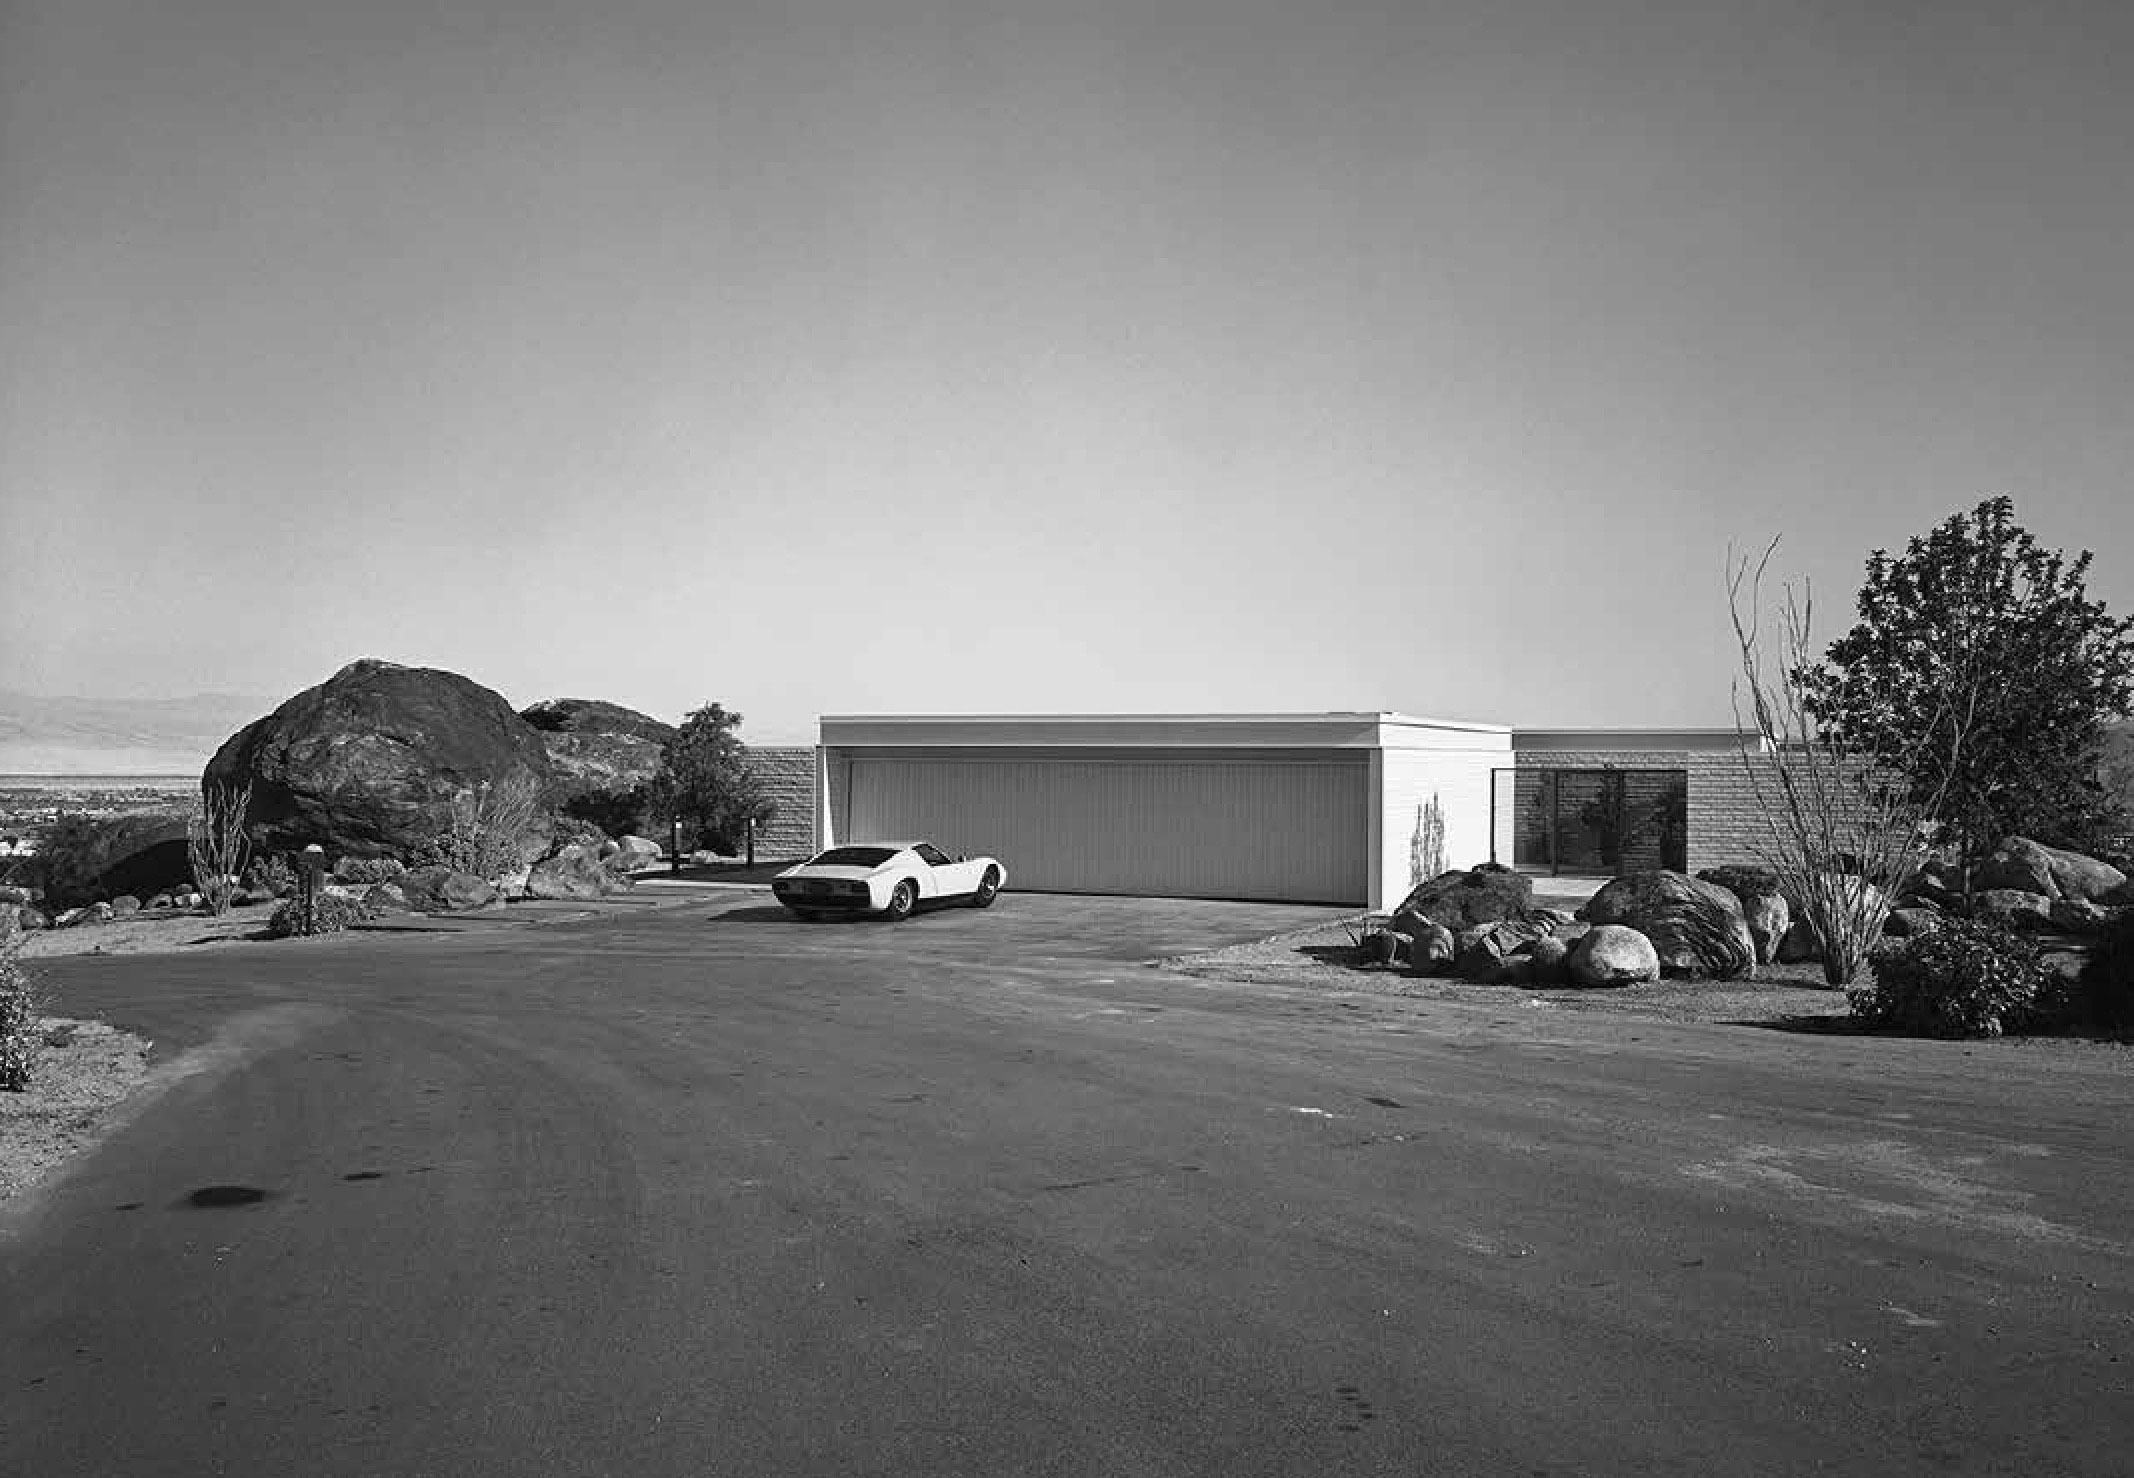 The Palevsky House - architect Craig Ellwood’s second commission from Max Palevsky as featured in California Captured Mid-Century Modern Architecture featuring the photographs of Marvin Rand. Rand snapped the car parked in Palevsky’s driveway after one of their drives together. (Less visible is Ellwood’s personalized license plate: VRRRRRM).